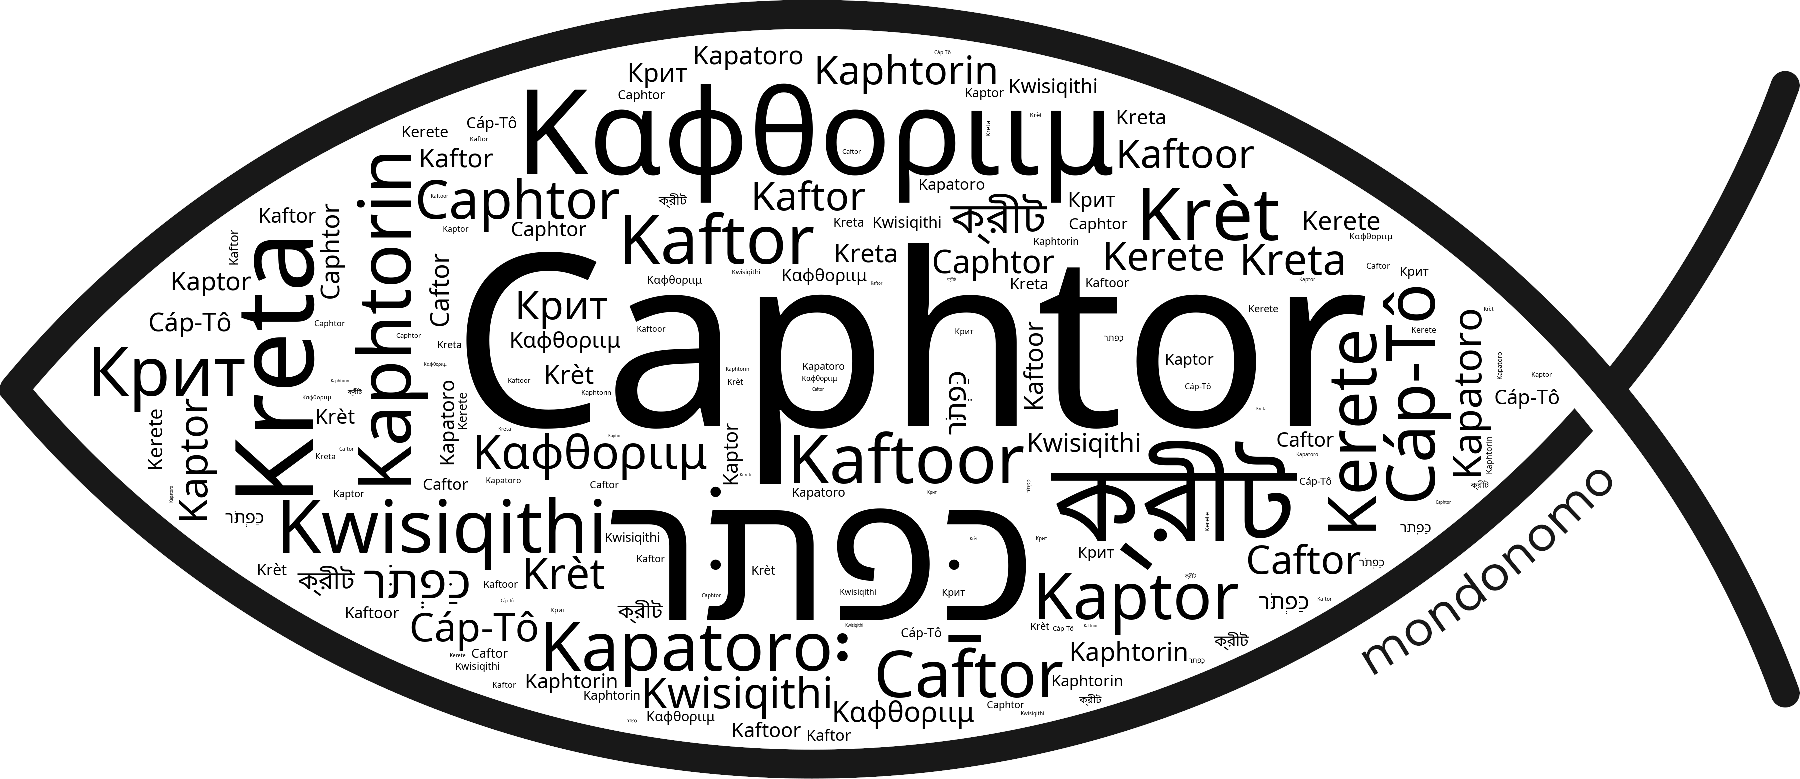 Name Caphtor in the world's Bibles